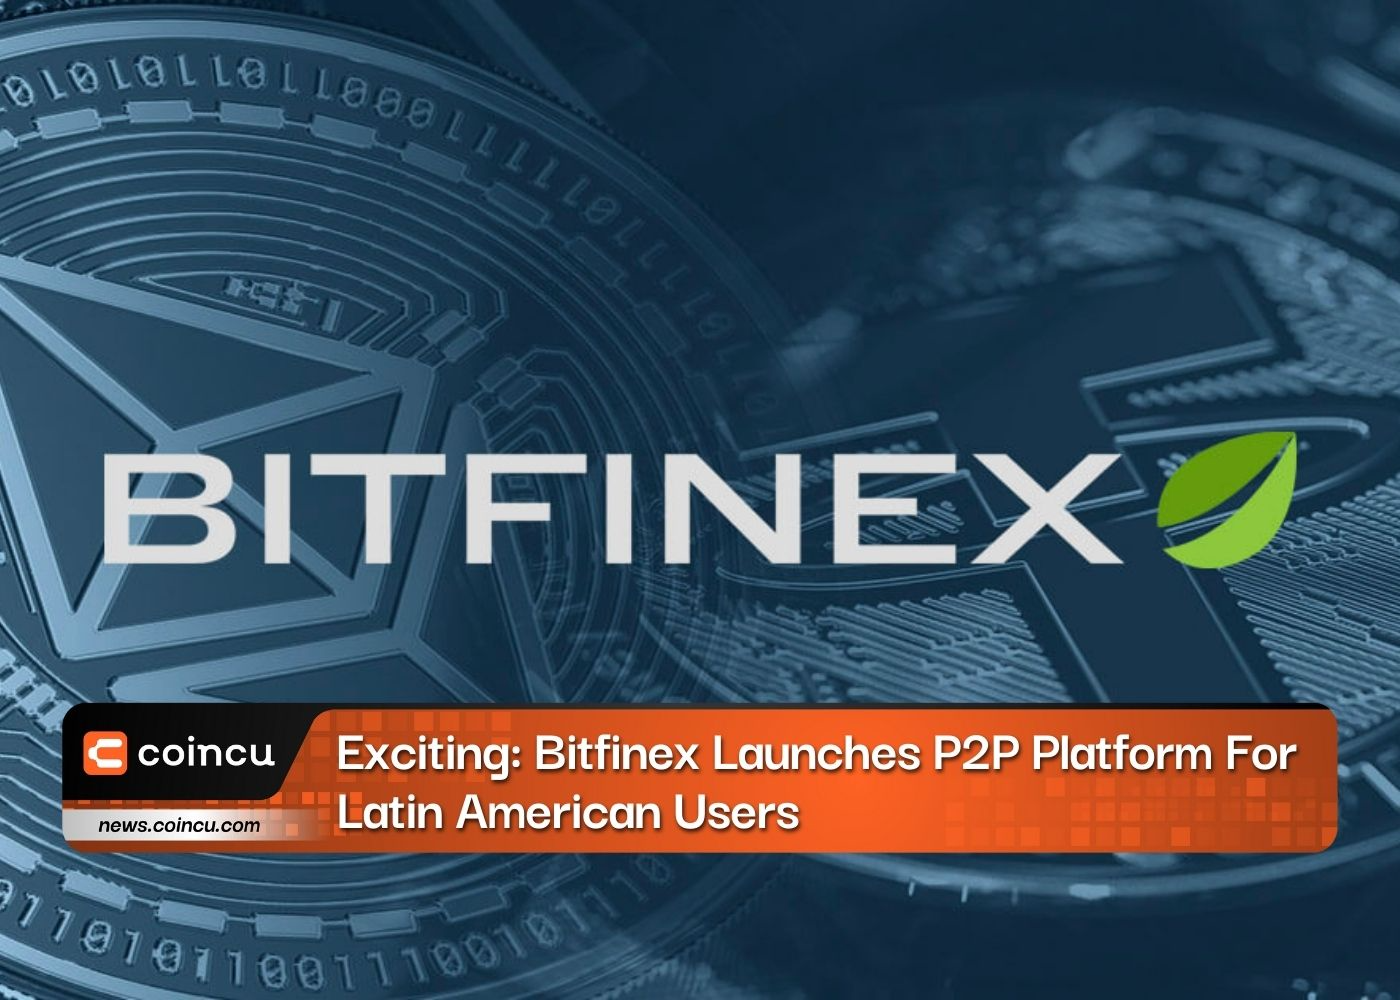 Exciting: Bitfinex Launches P2P Platform For Latin American Users